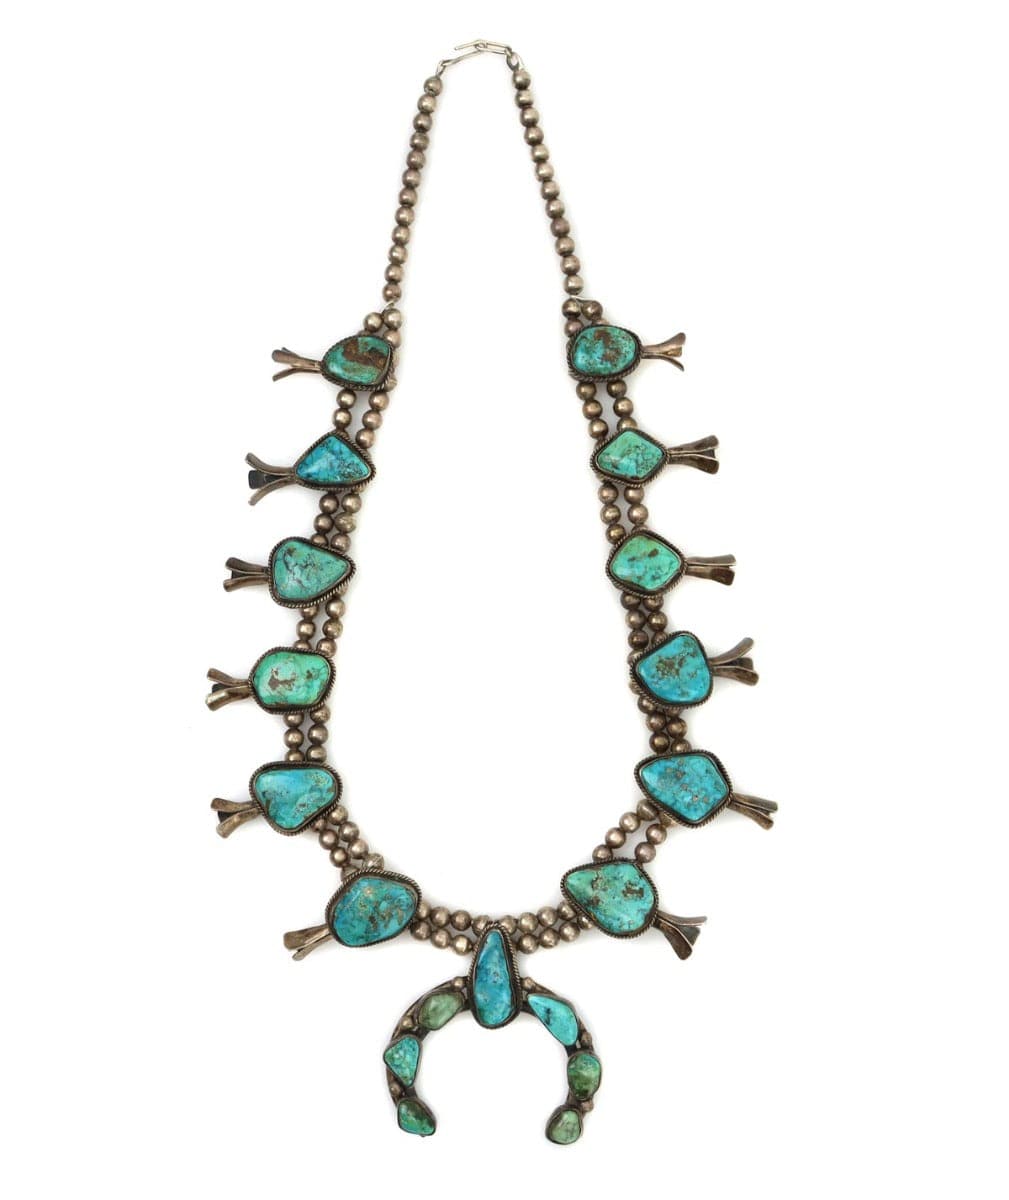 Navajo Turquoise and Silver Beaded Squash Blossom Necklace c. 1940-50s, 28" length (J15126)
